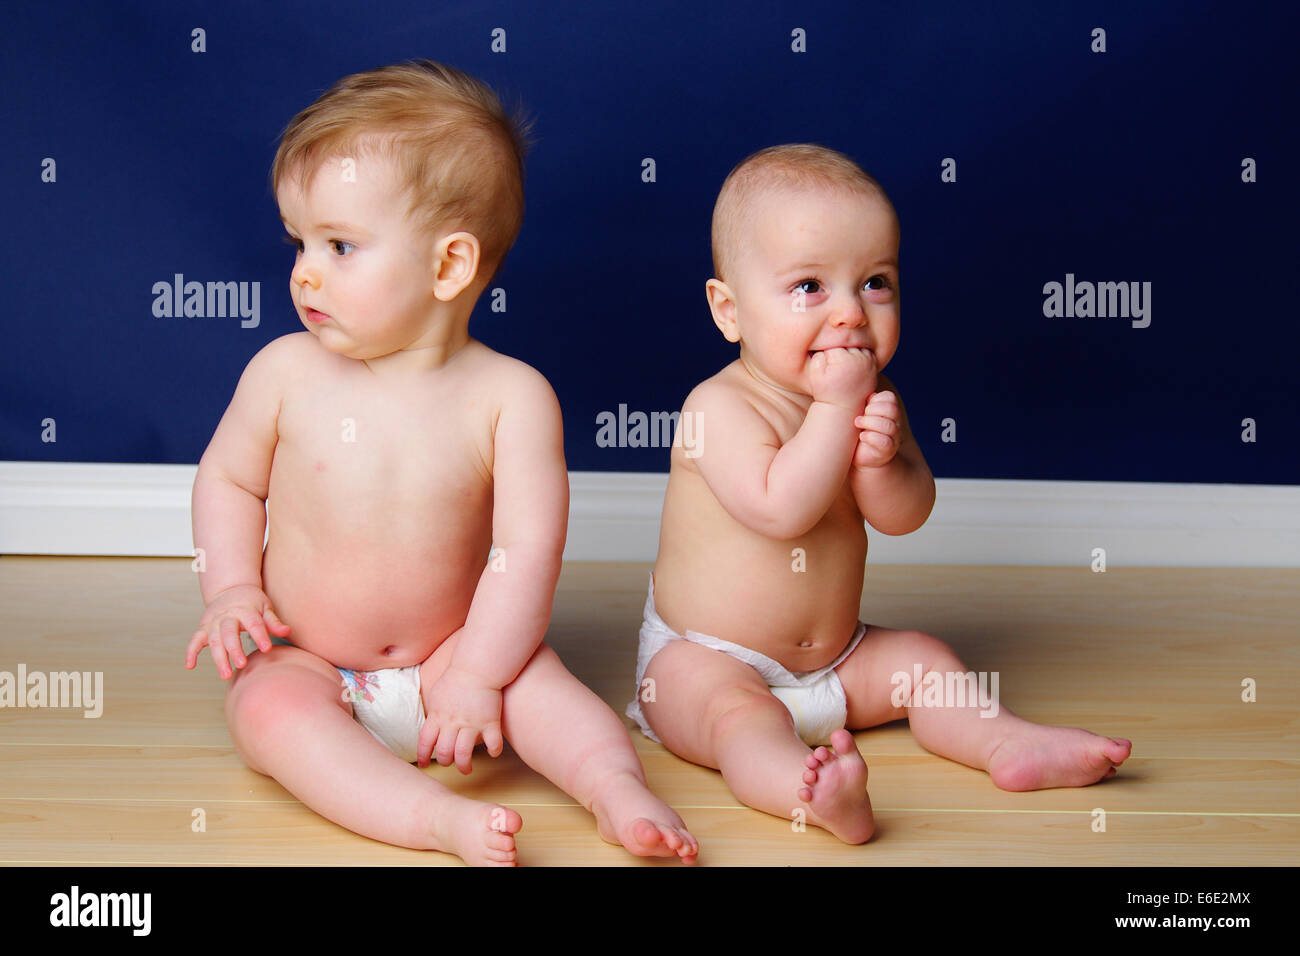 Twin 9 month old babies grinning and sitting up Stock Photo